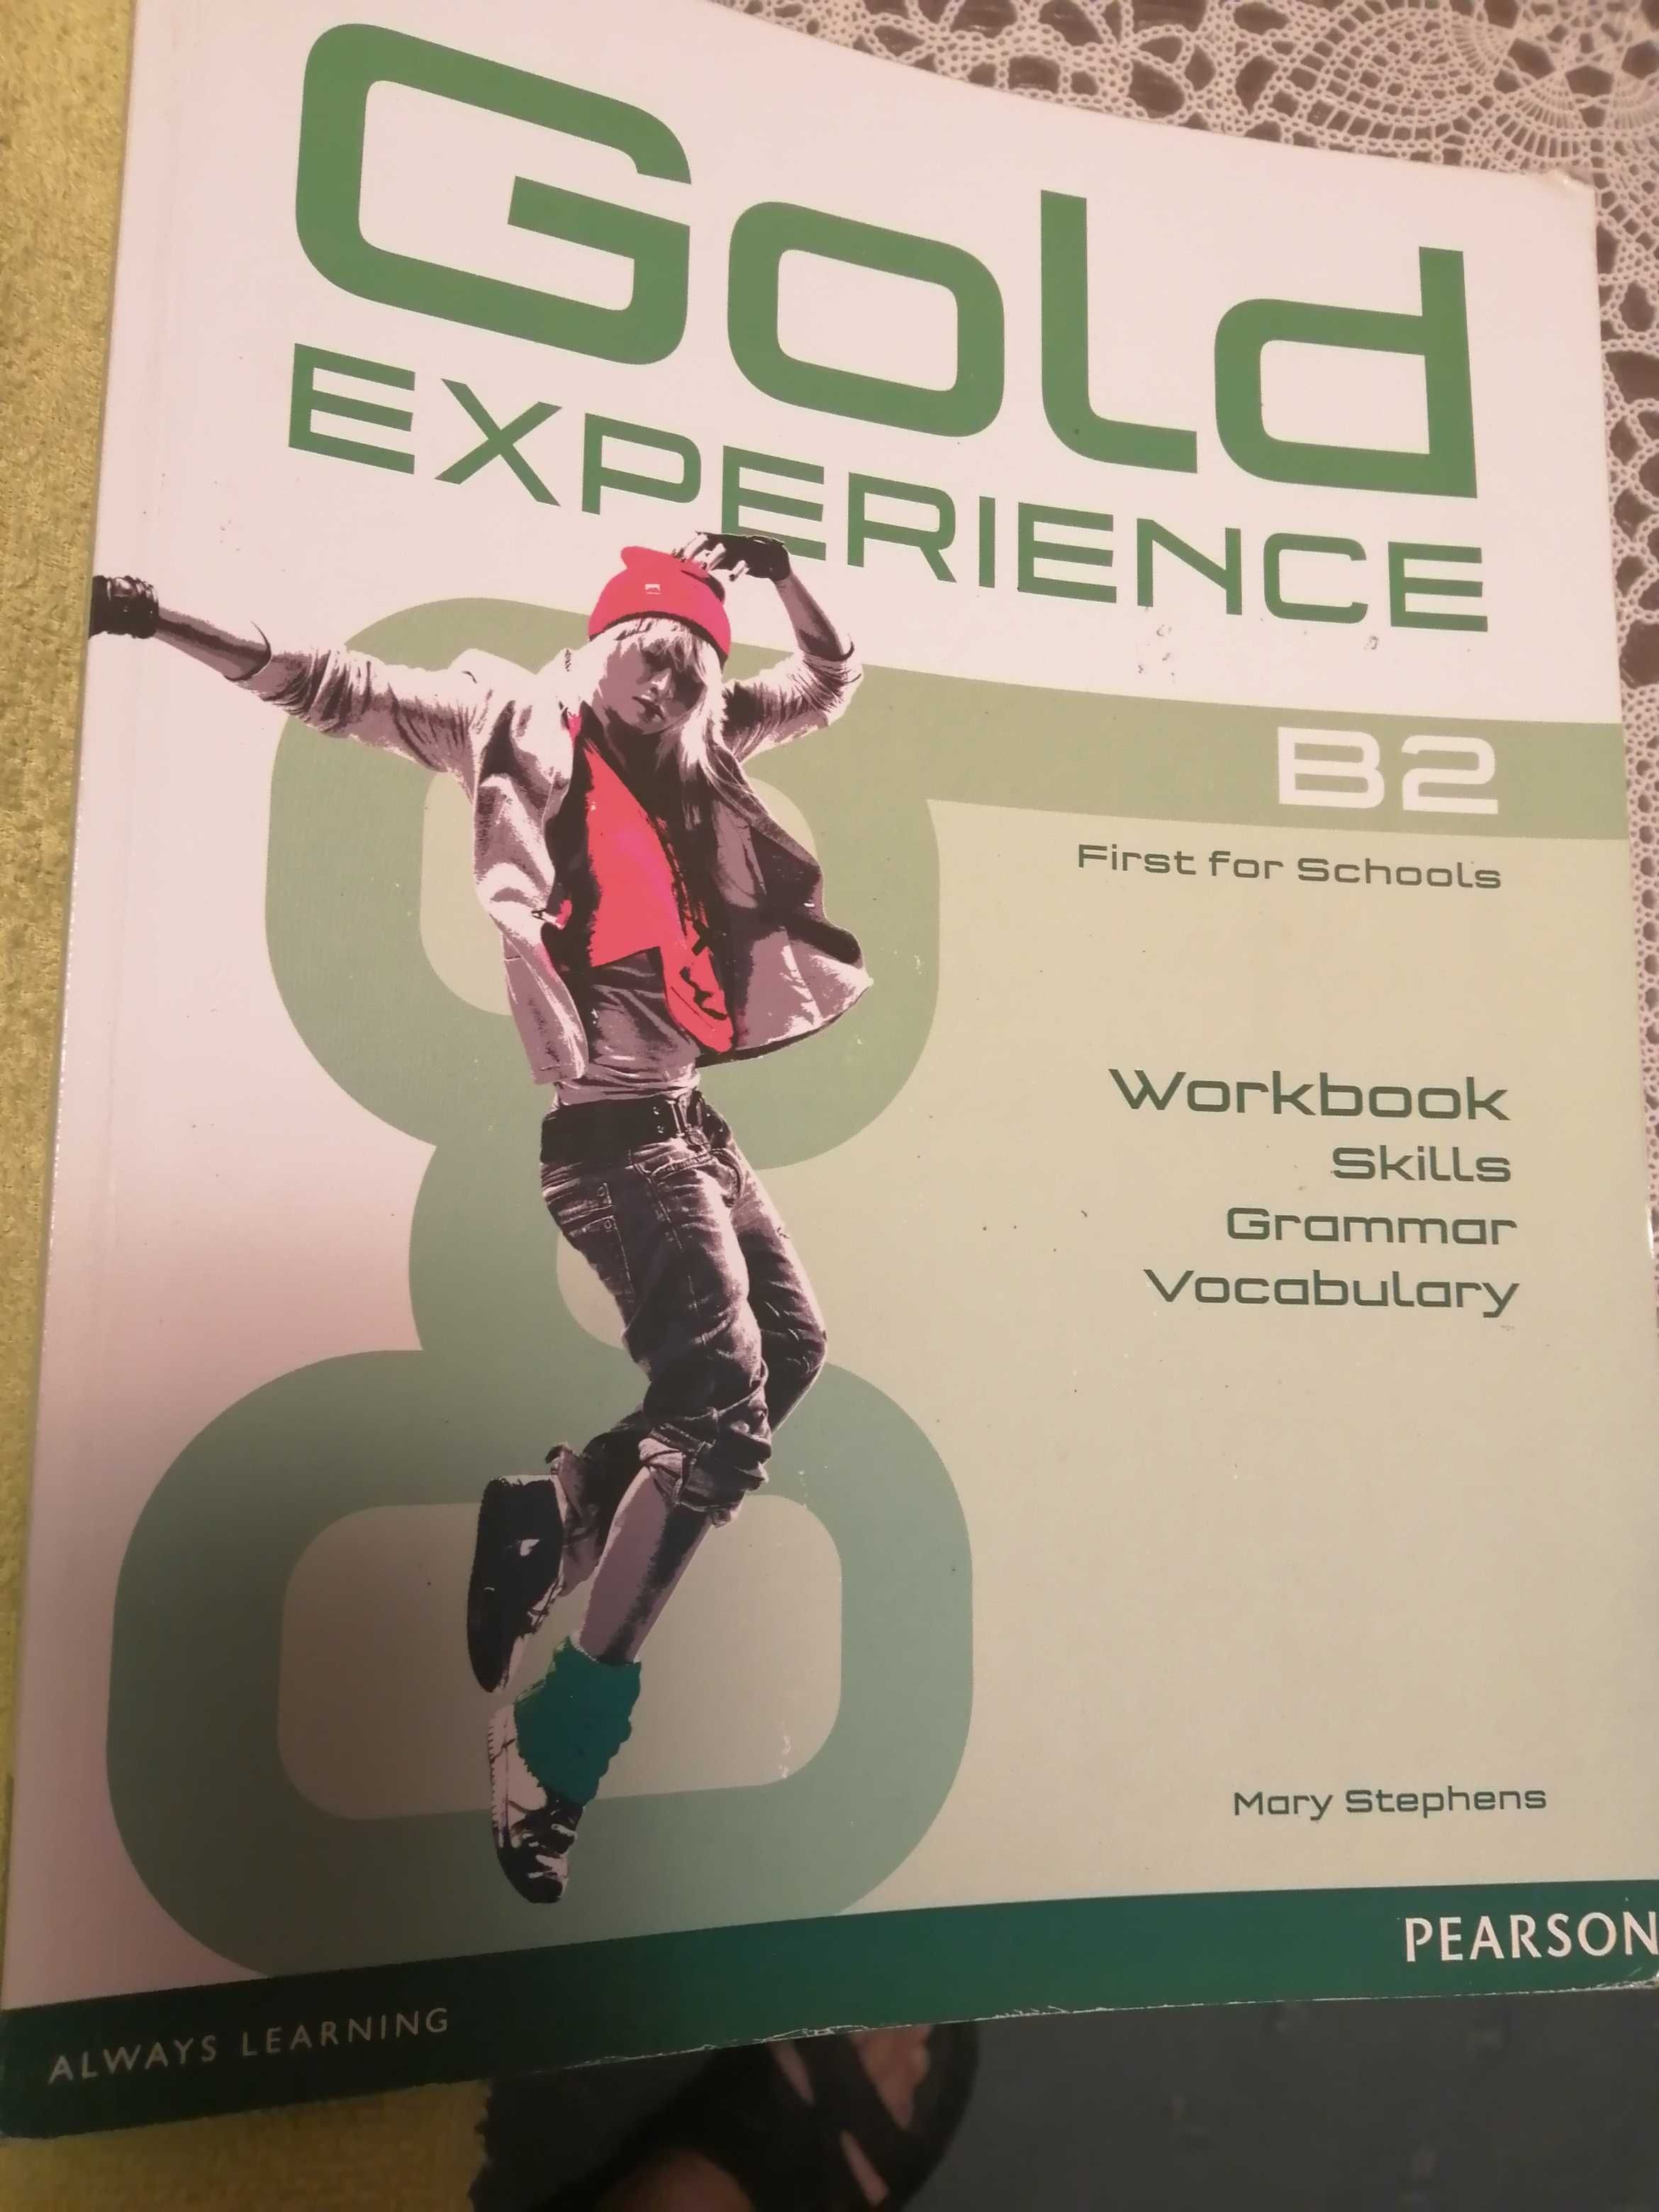 Angielski, Gold Experience, Workbook, B2, First for Schools, 2 egz.